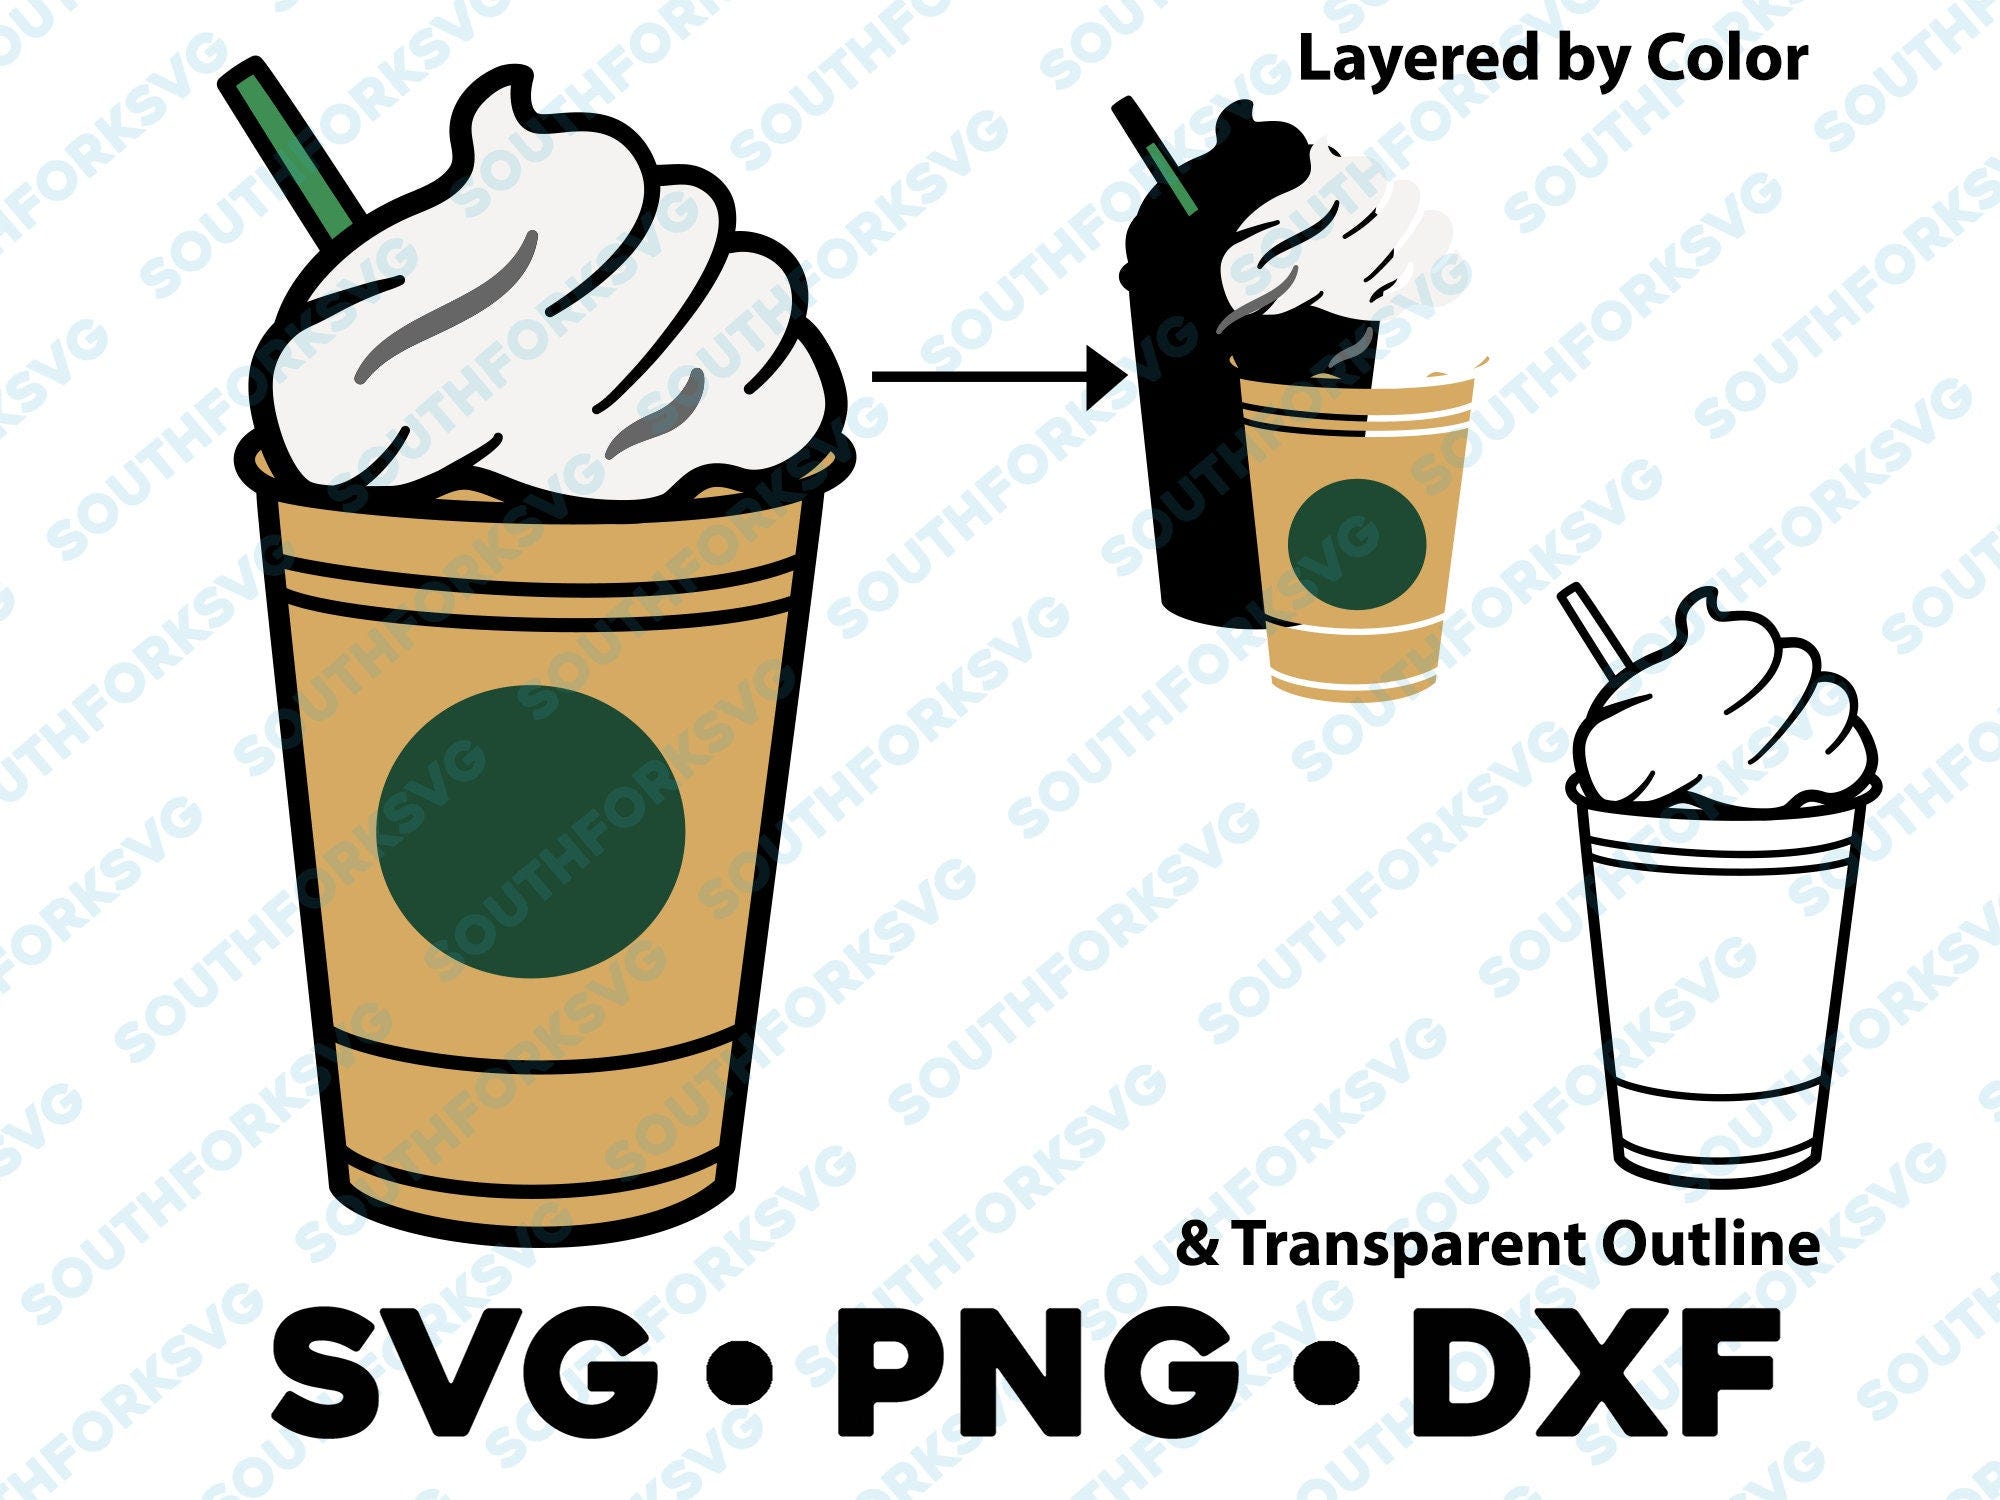 Iced Coffee SVG PNG DXF Layered by Color Cut File Clip Art Vector Graphic | Cooking Chef Kitchen Food Date Cute Simple Food Icon